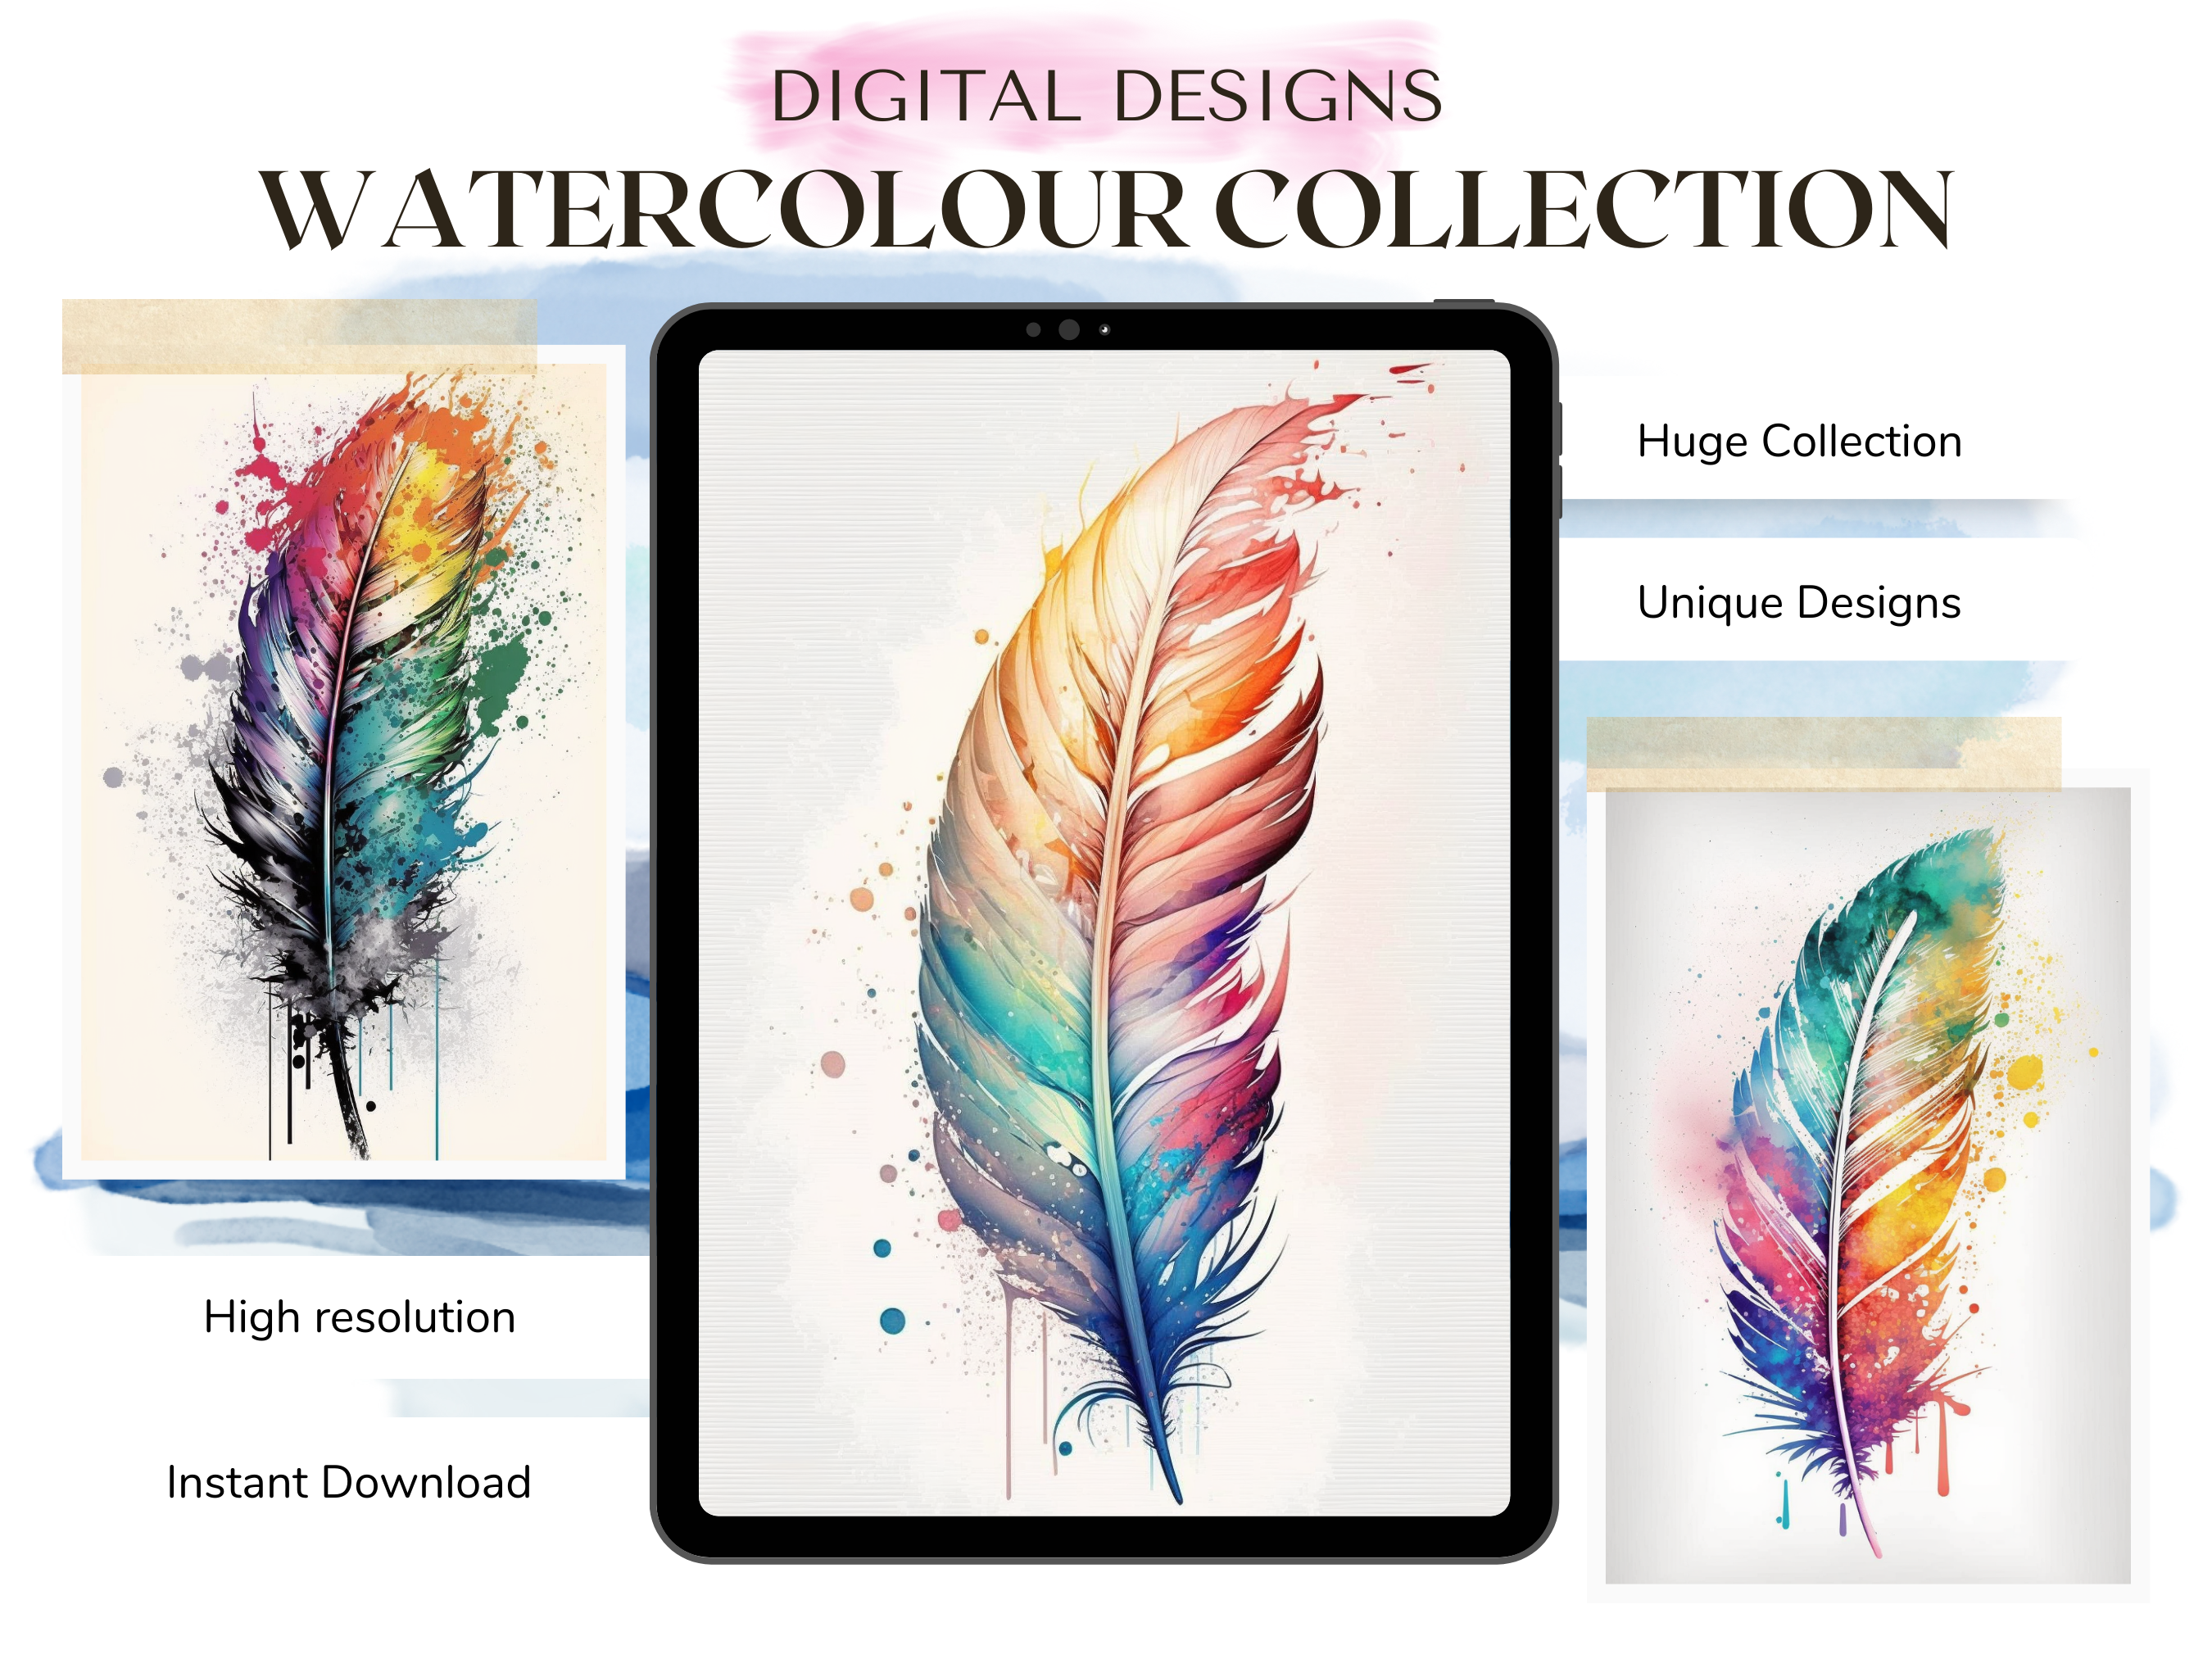 Feathers Watercolour Tattoo Designs | PDF Reference Designs for Tattoos